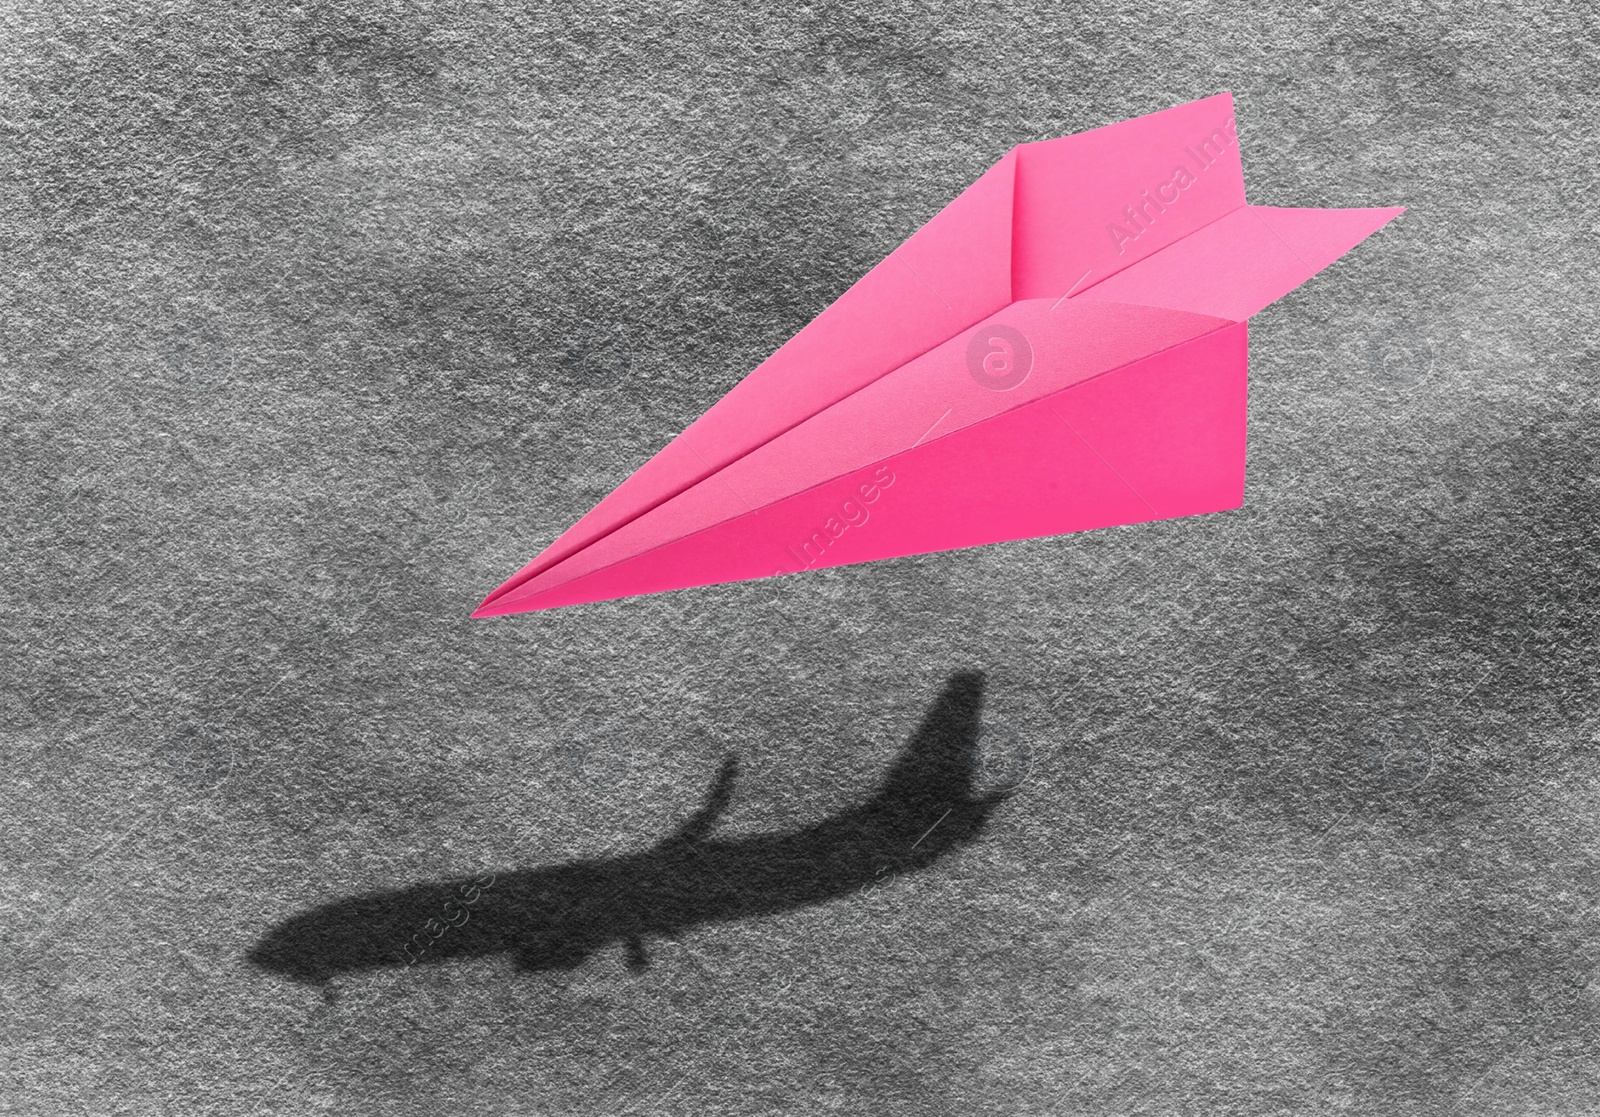 Image of Flying paper plane and shadow of a real airplane on asphalt